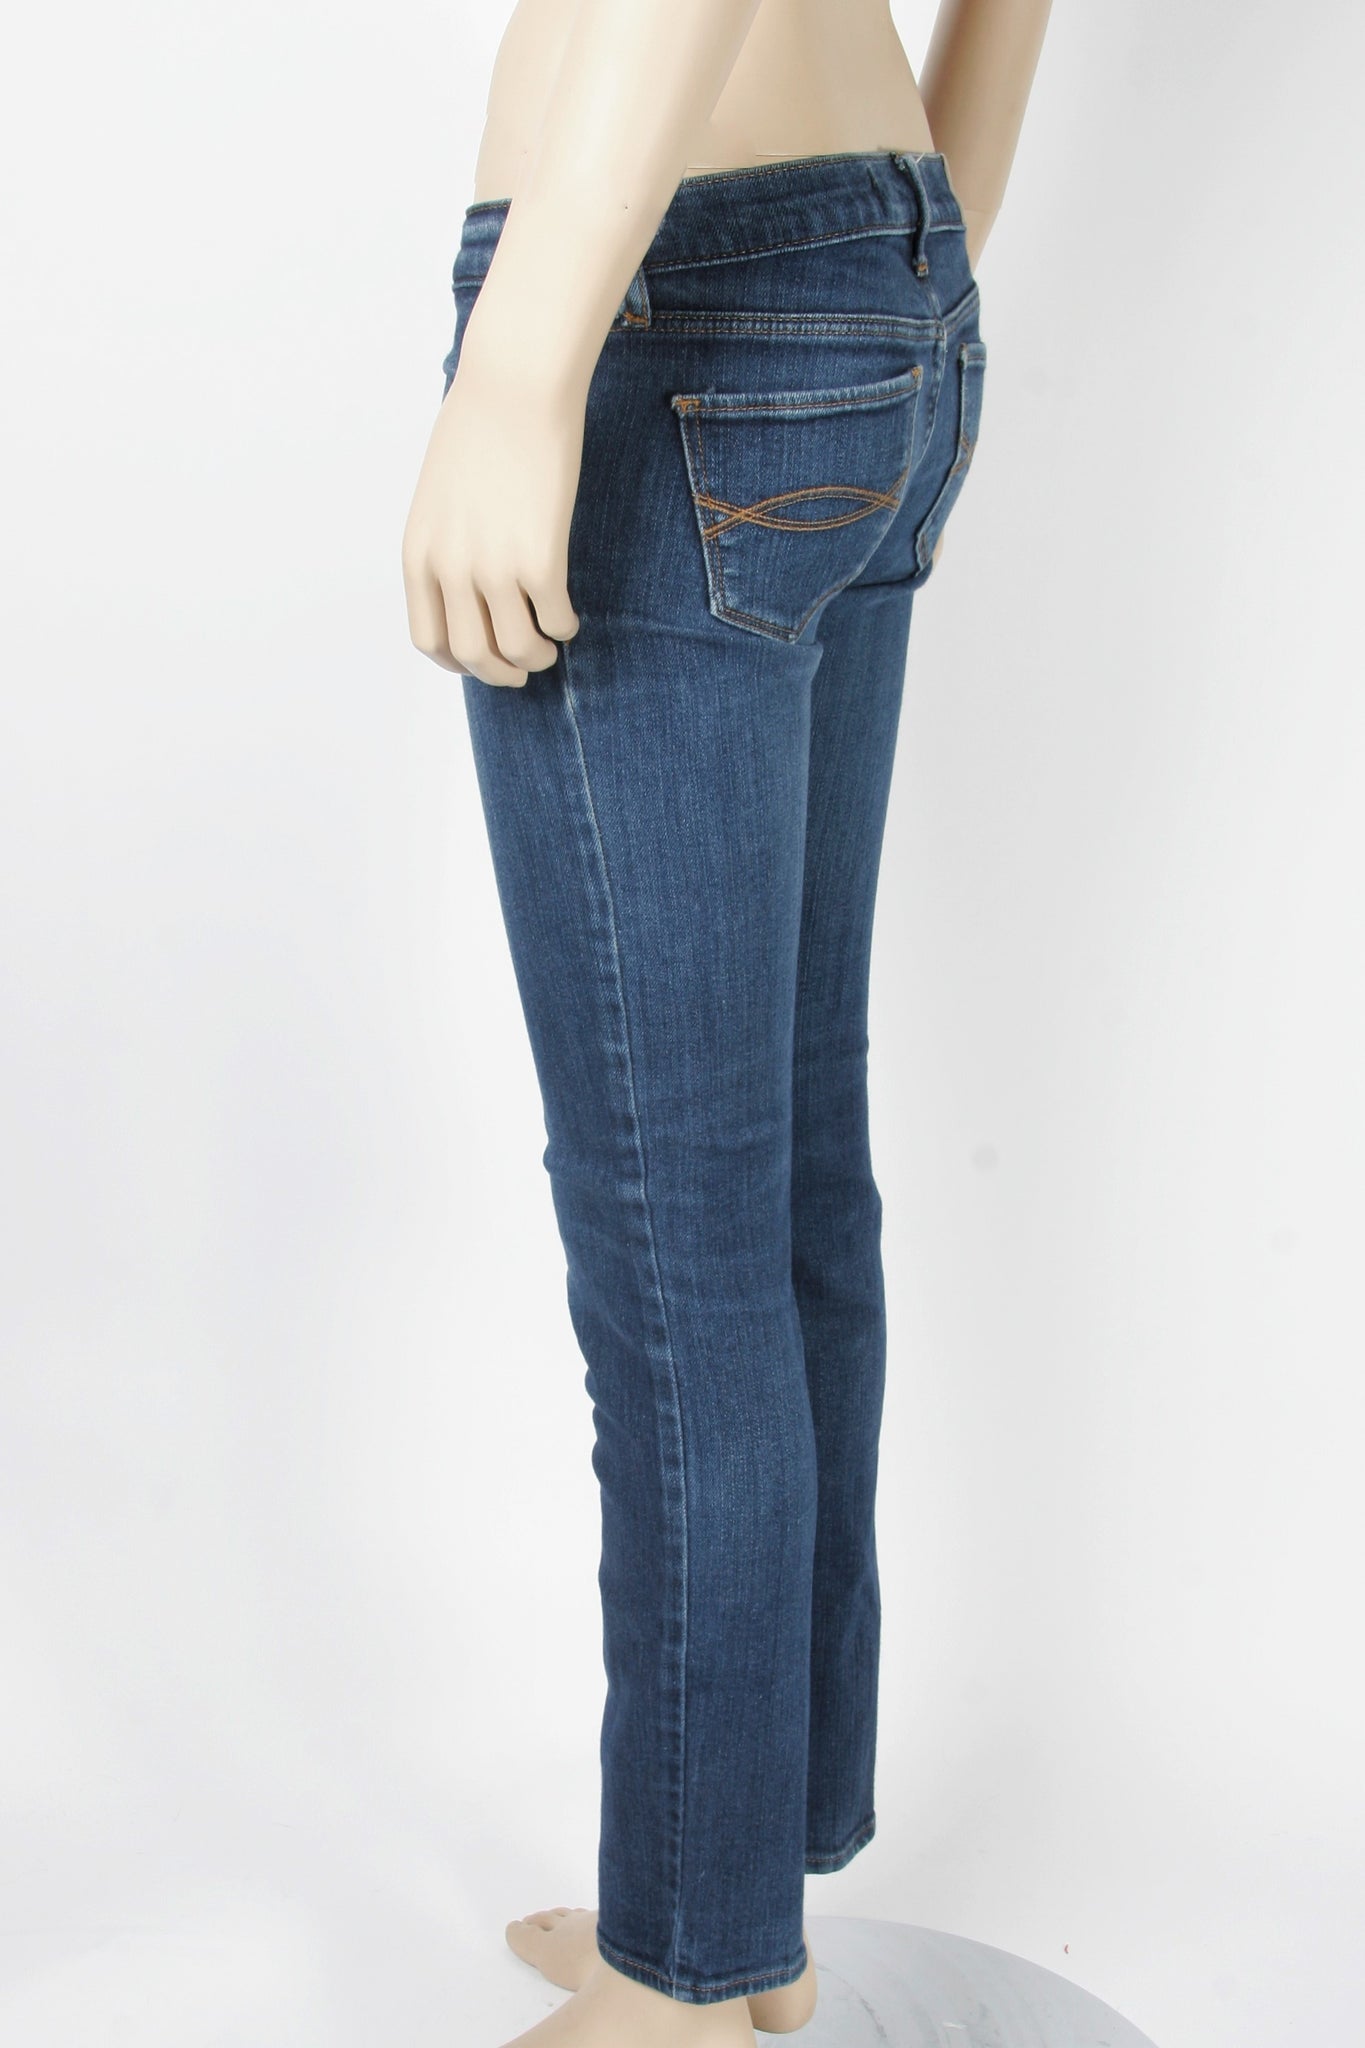 Abercrombie & Fitch Perfect Stretch “Erin” Jeans-Size 25 – Second Bite